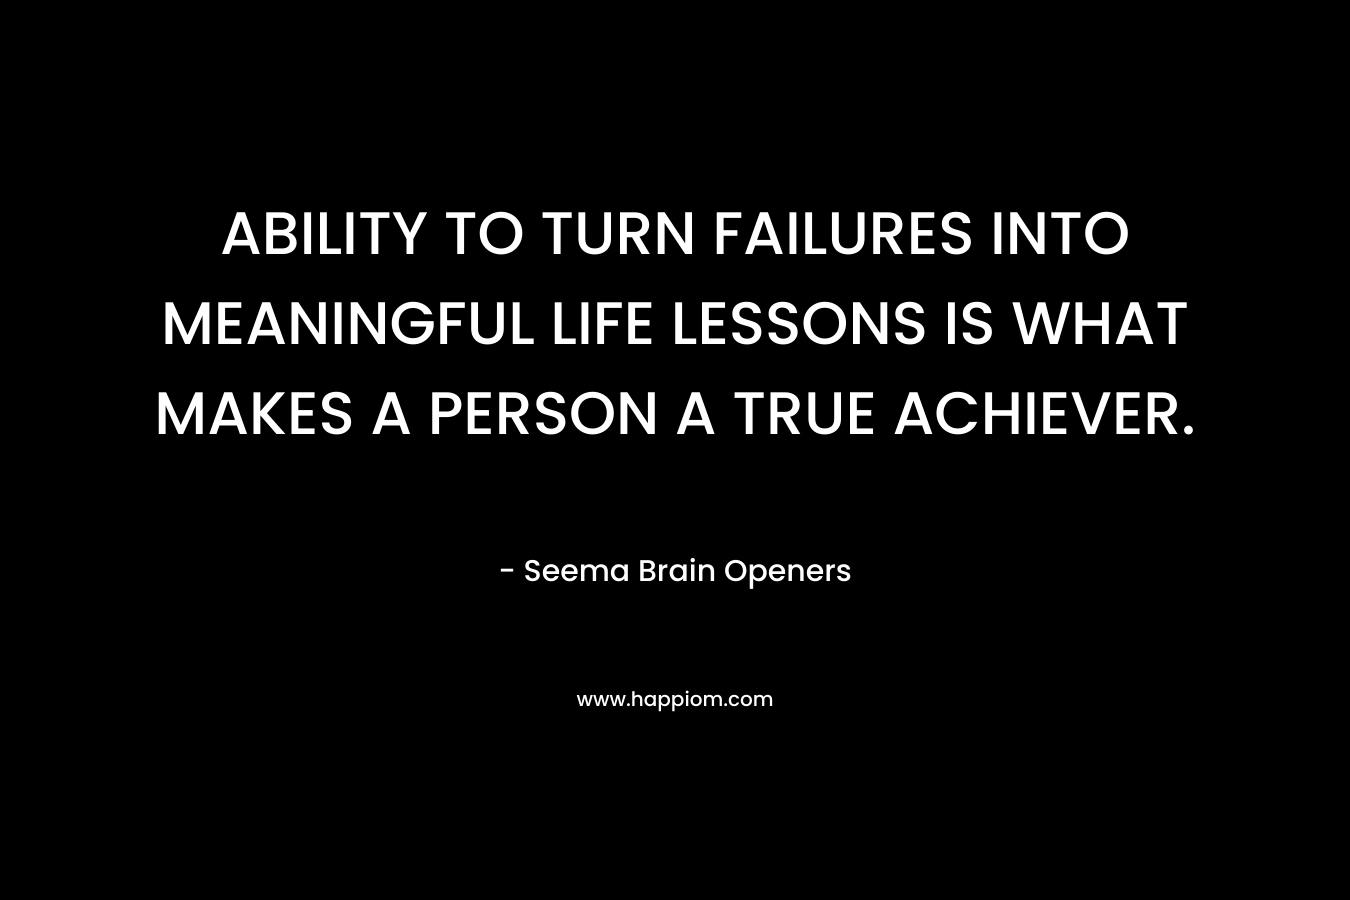 ABILITY TO TURN FAILURES INTO MEANINGFUL LIFE LESSONS IS WHAT MAKES A PERSON A TRUE ACHIEVER. – Seema Brain Openers